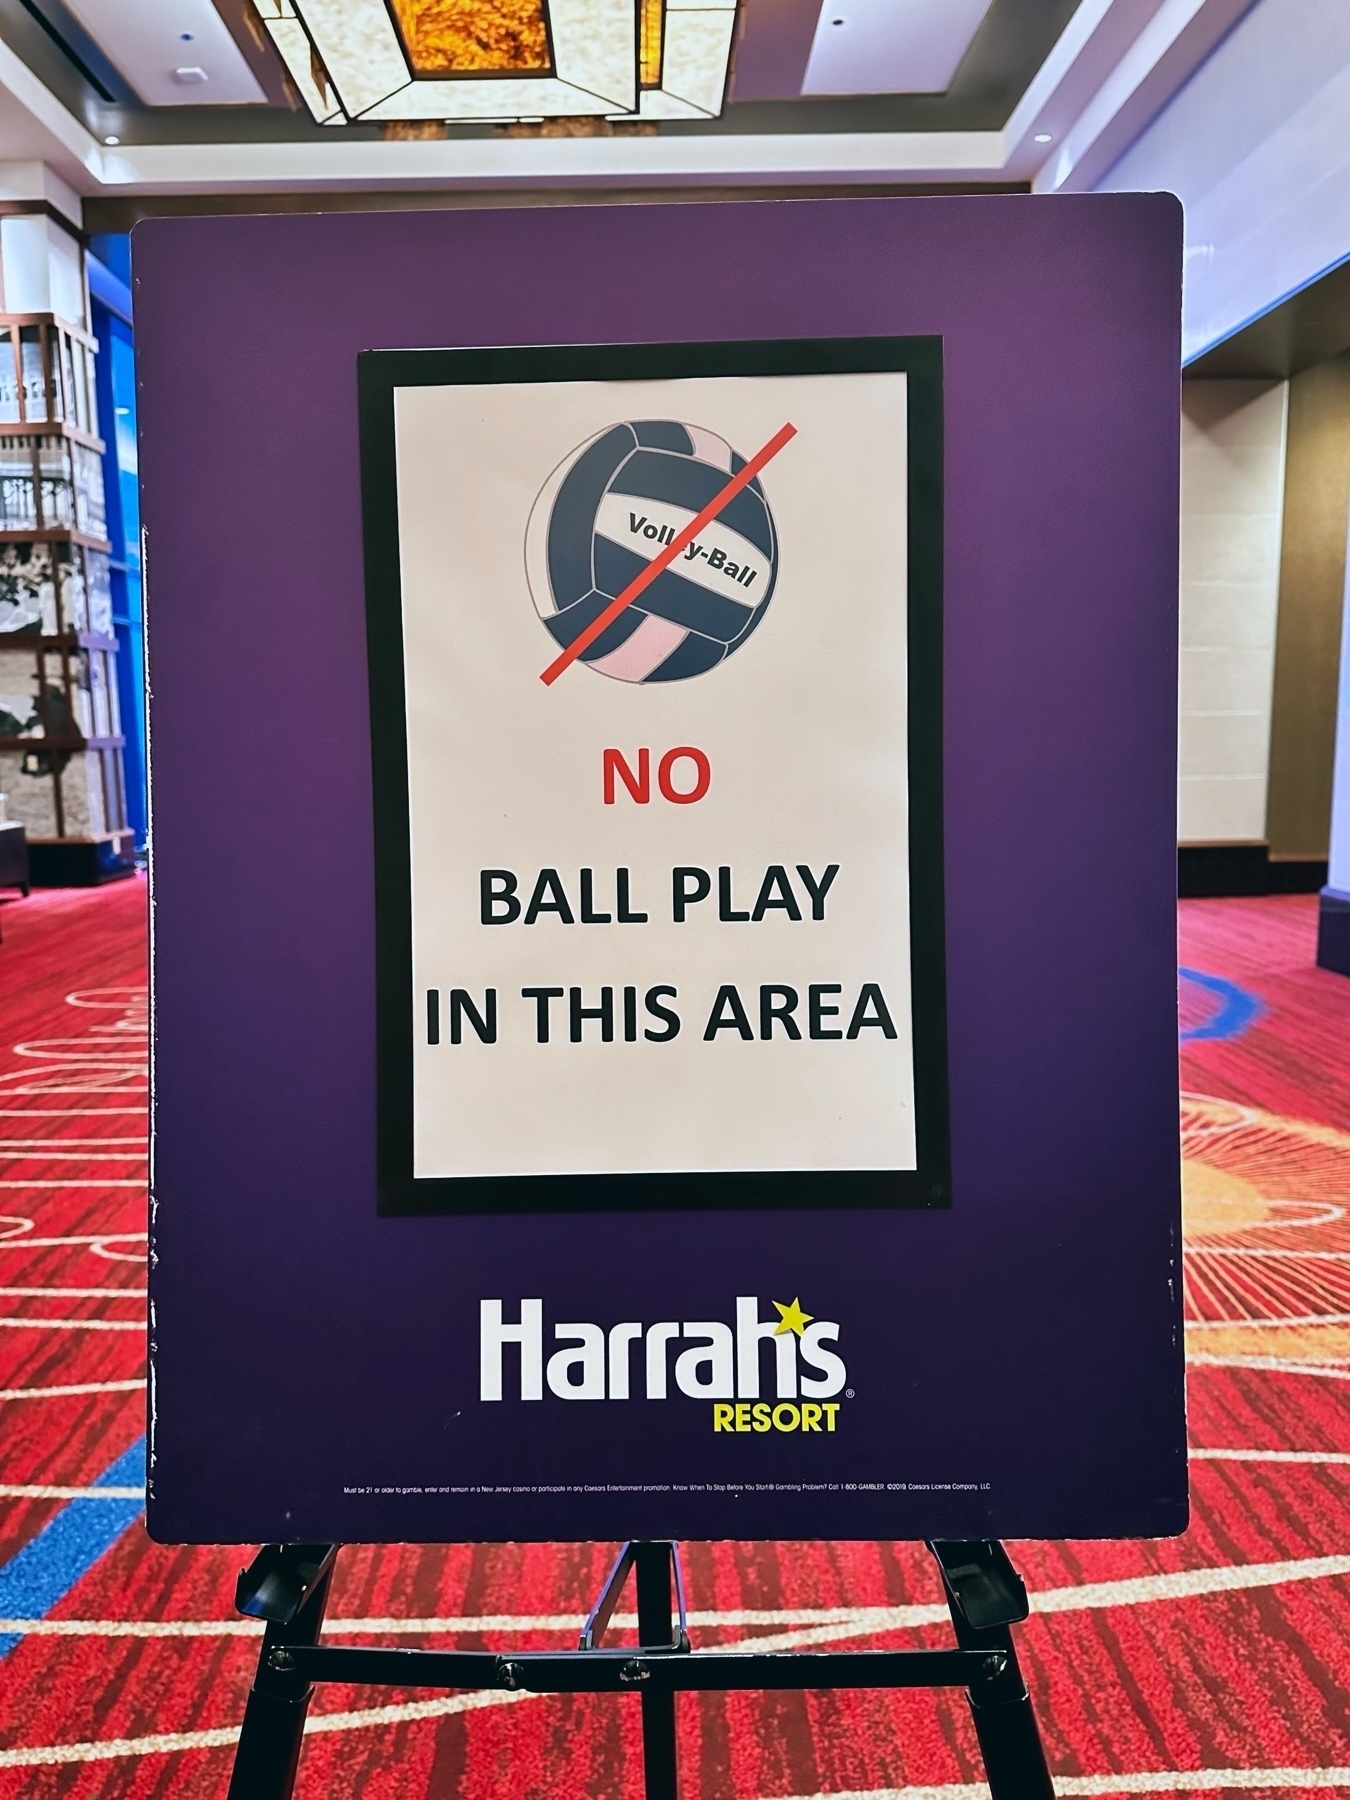 A sign that shows a volley ball with a red line through it, and below it says “NO BALL PLAY IN THIS AREA”